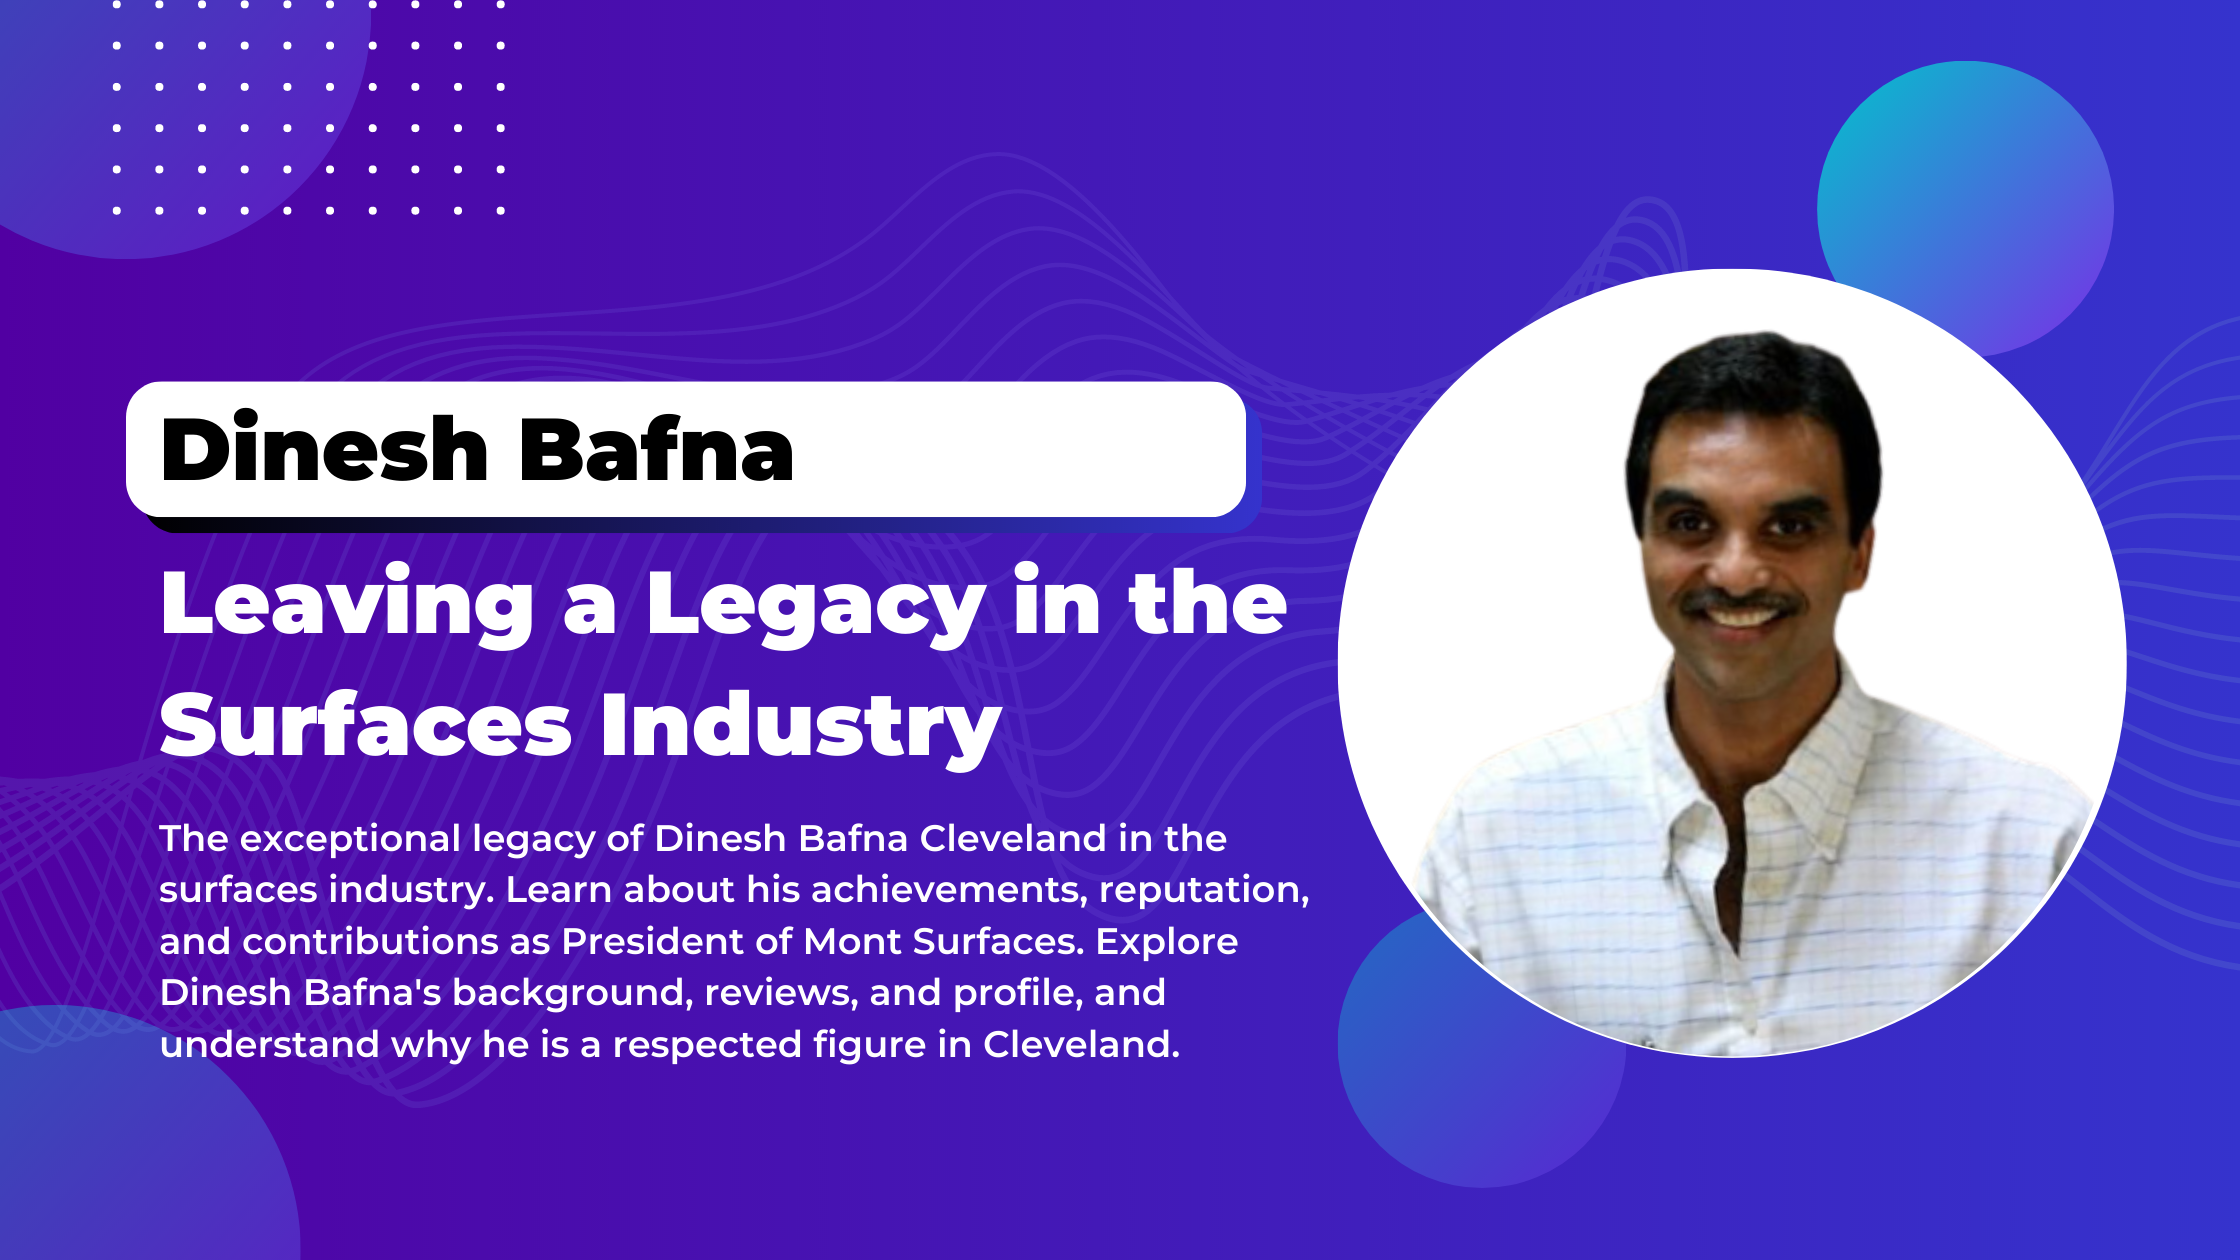 Dinesh Bafna Cleveland: Leaving a Legacy in the Surfaces Industry